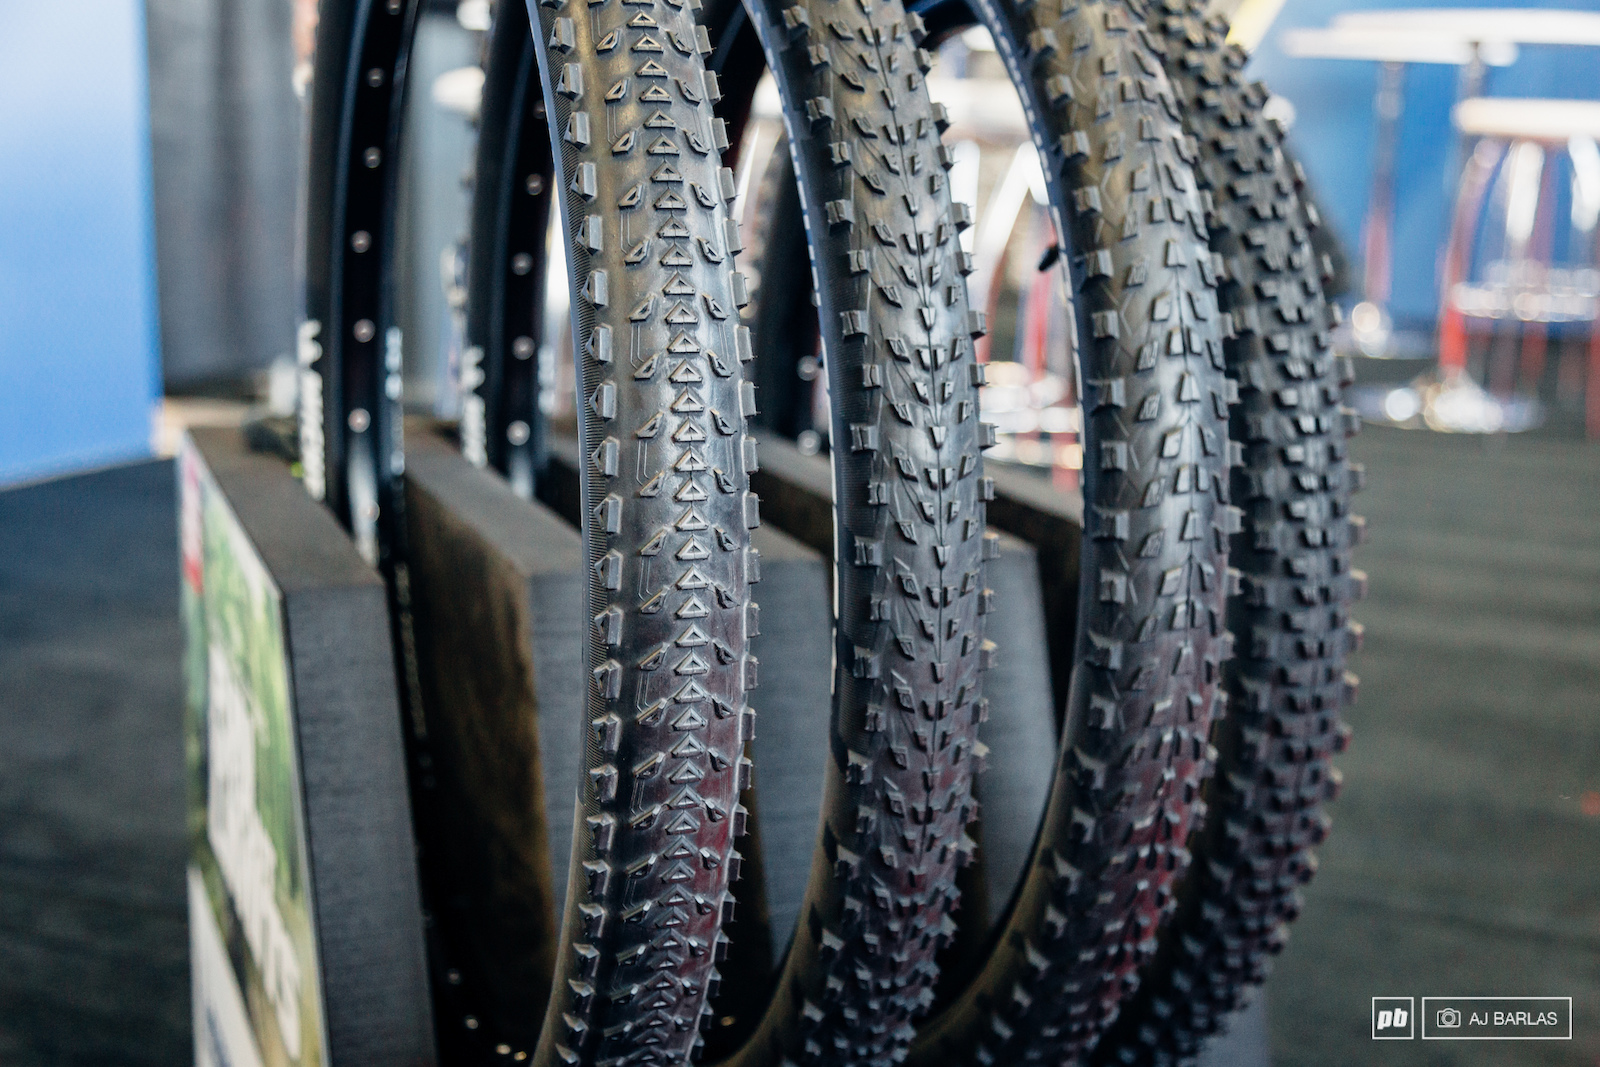 The Jet XCR (far left) is the brands XC racing tire.